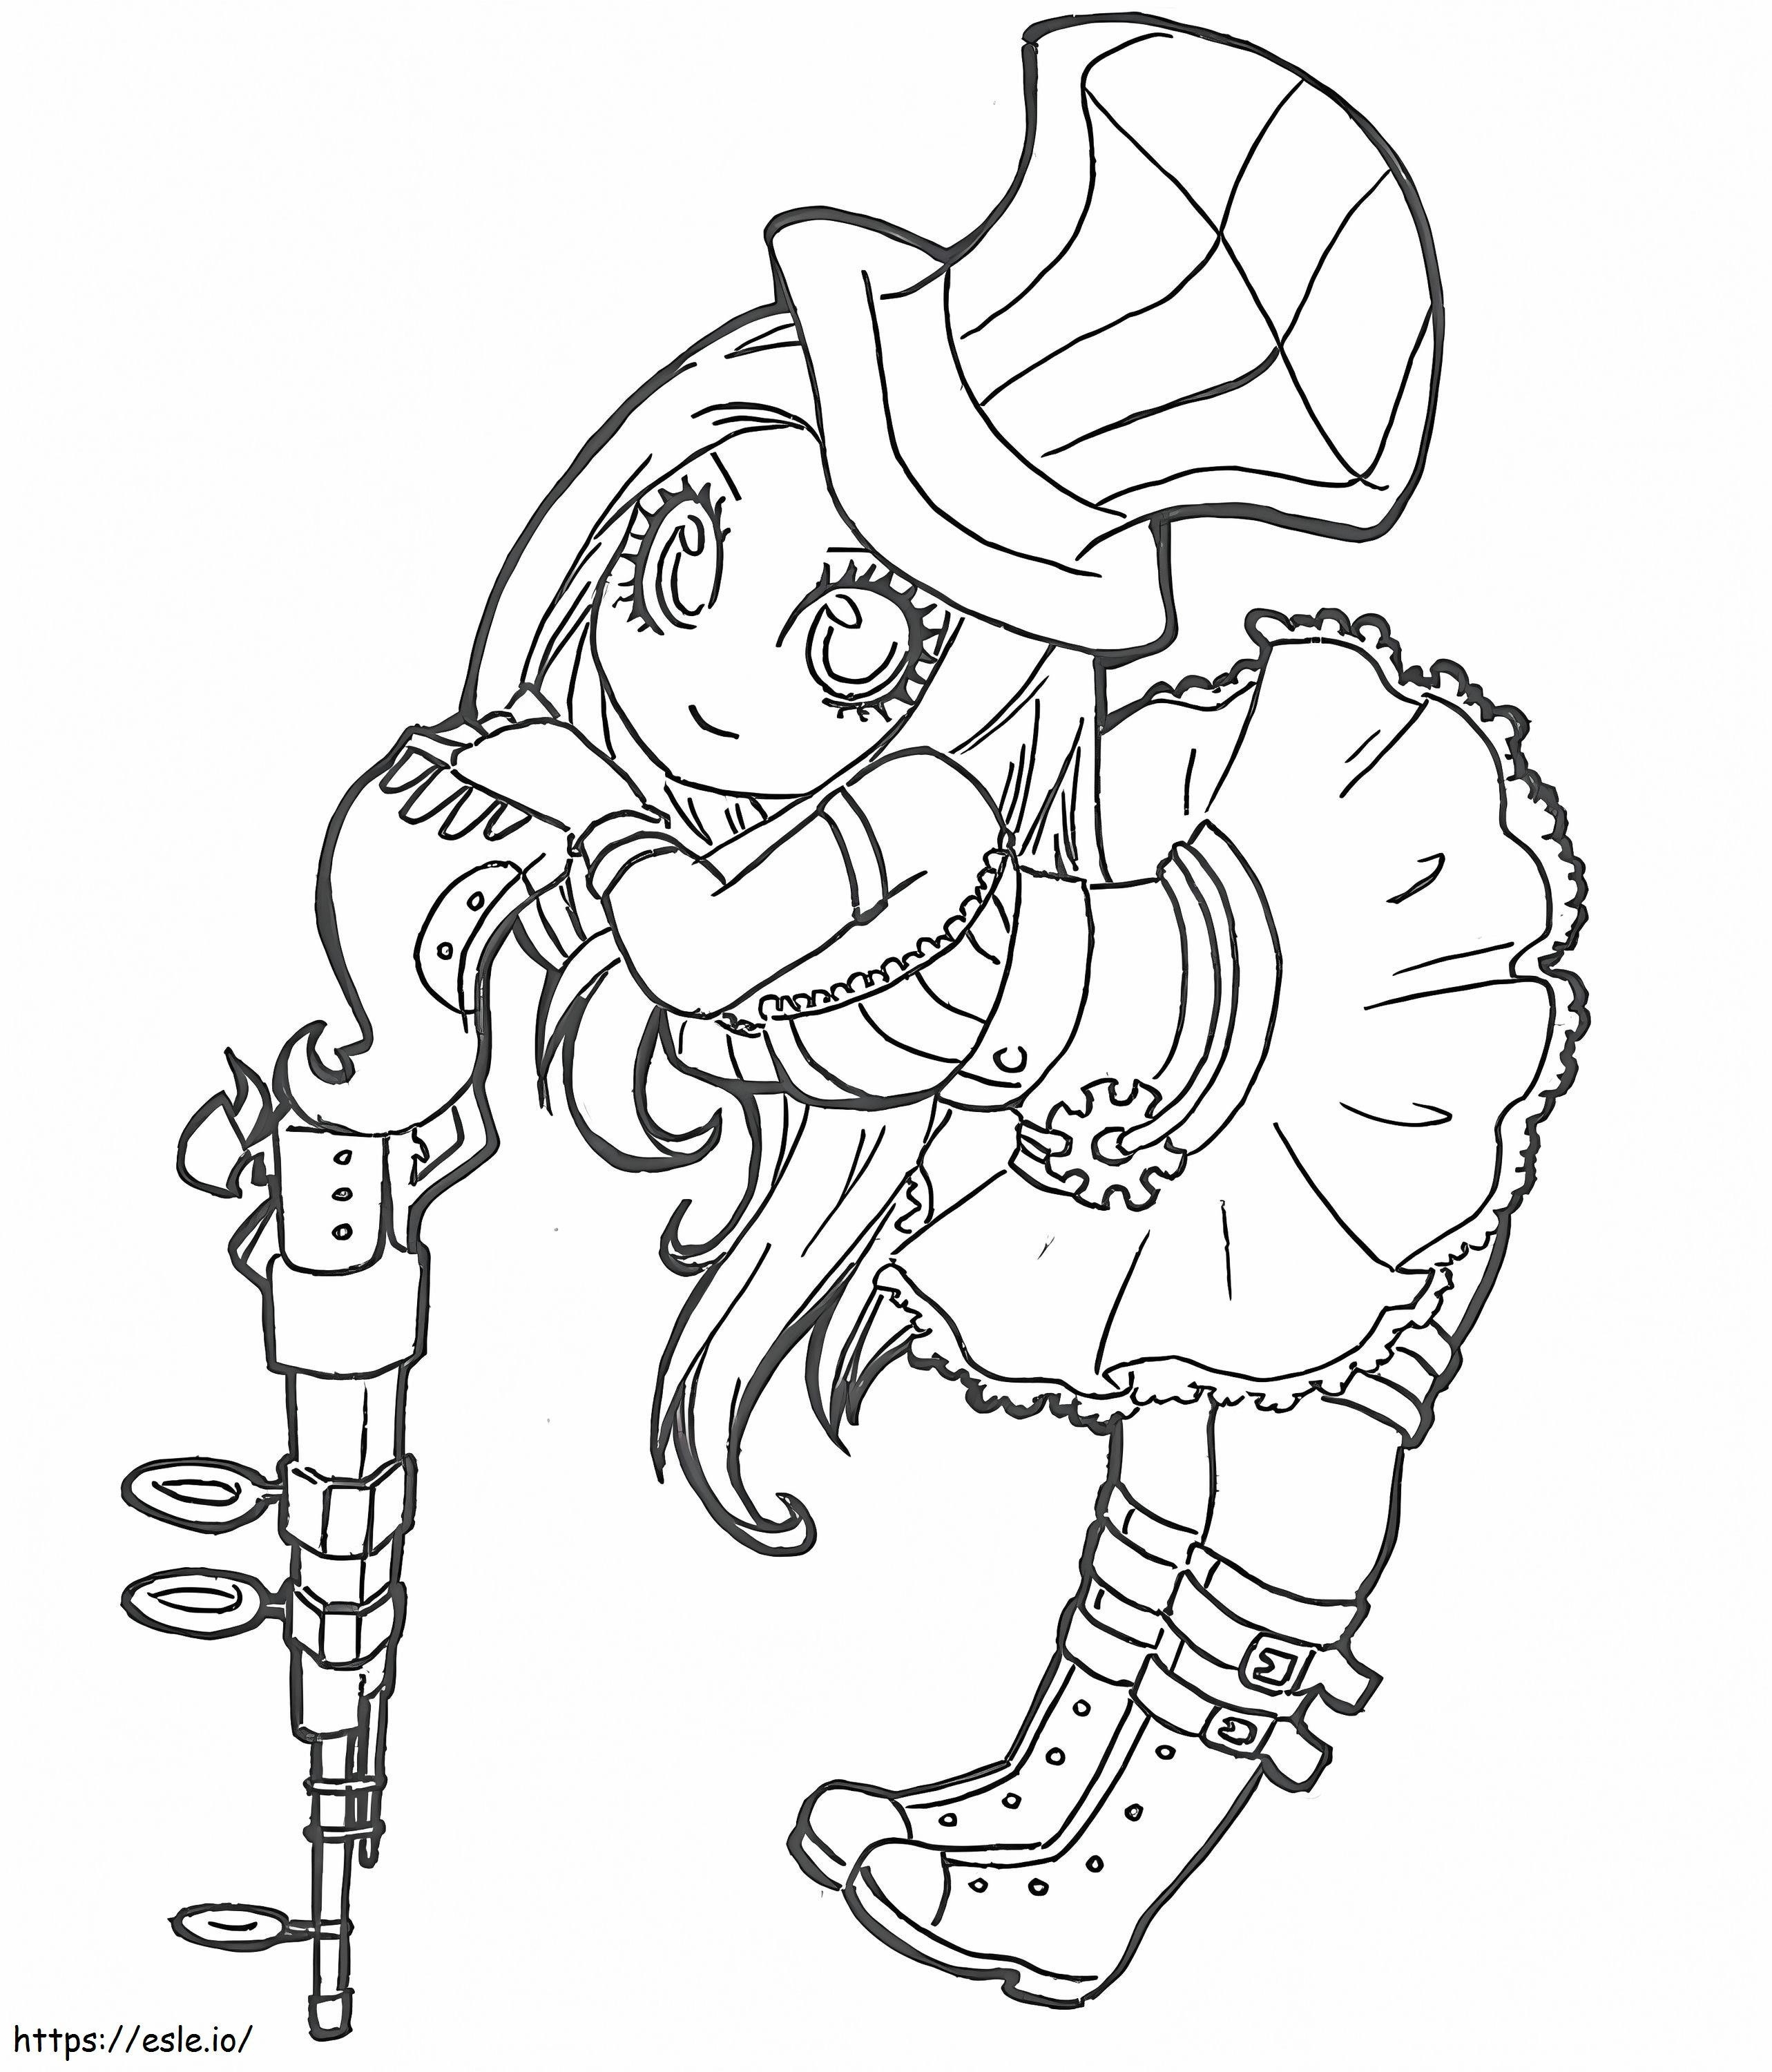 Chibi Caitlyn coloring page